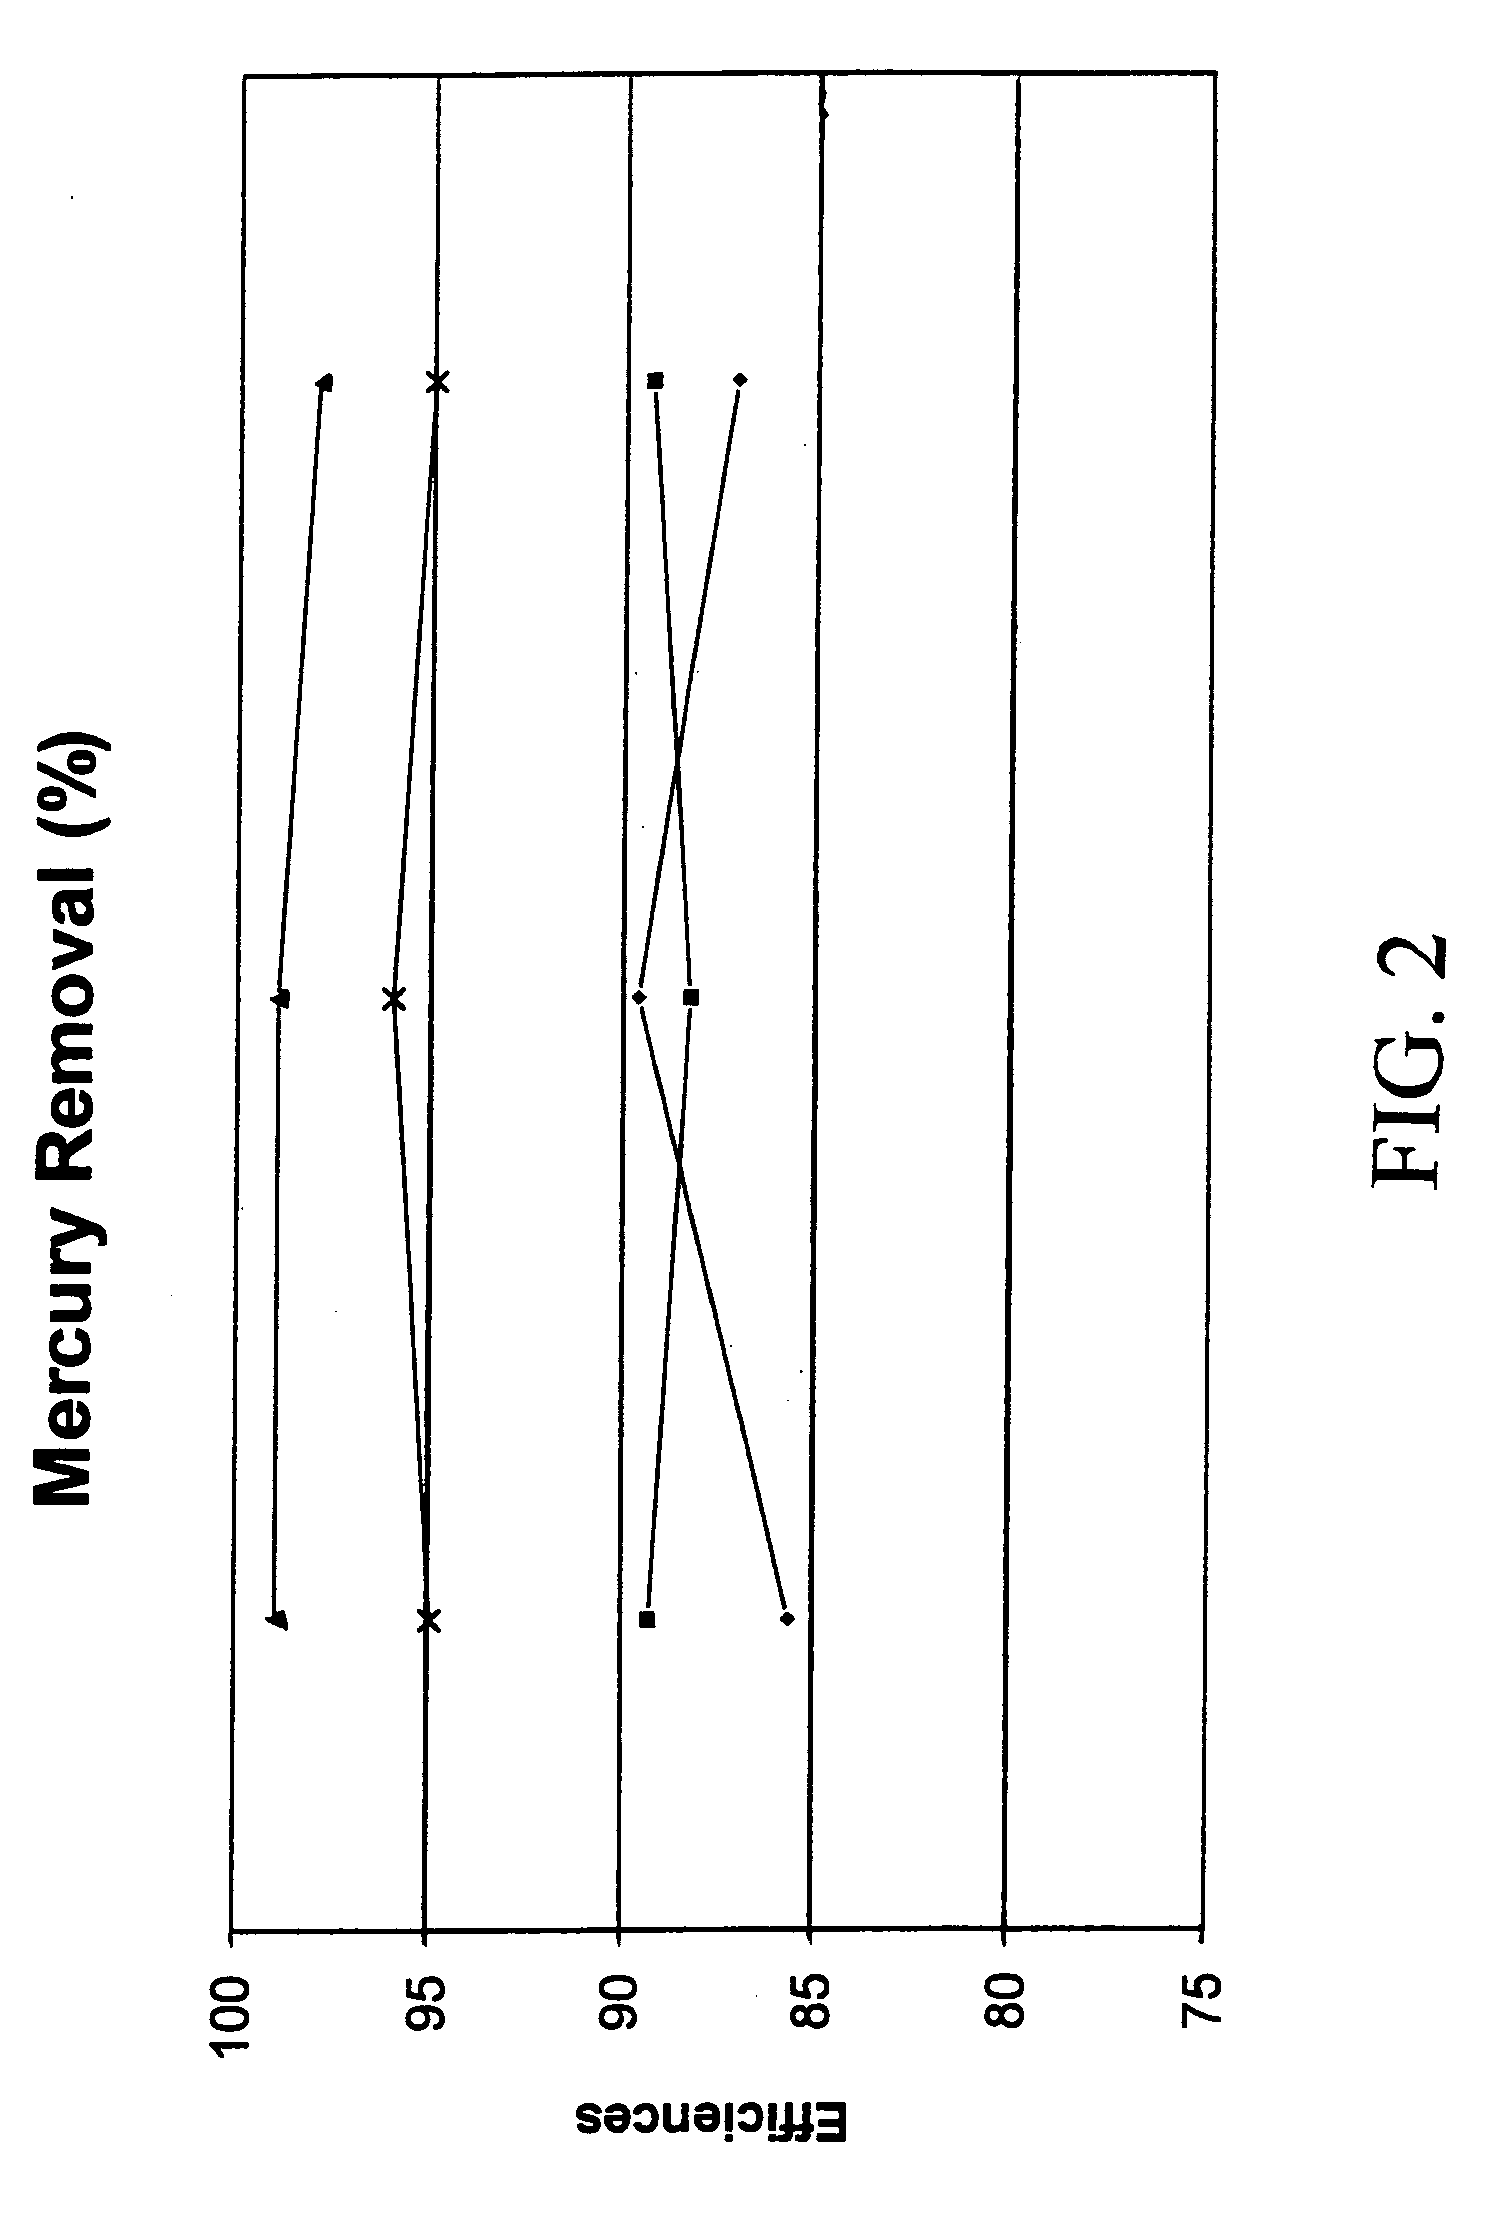 Apparatus and method for removing mercury vapor from a gas stream